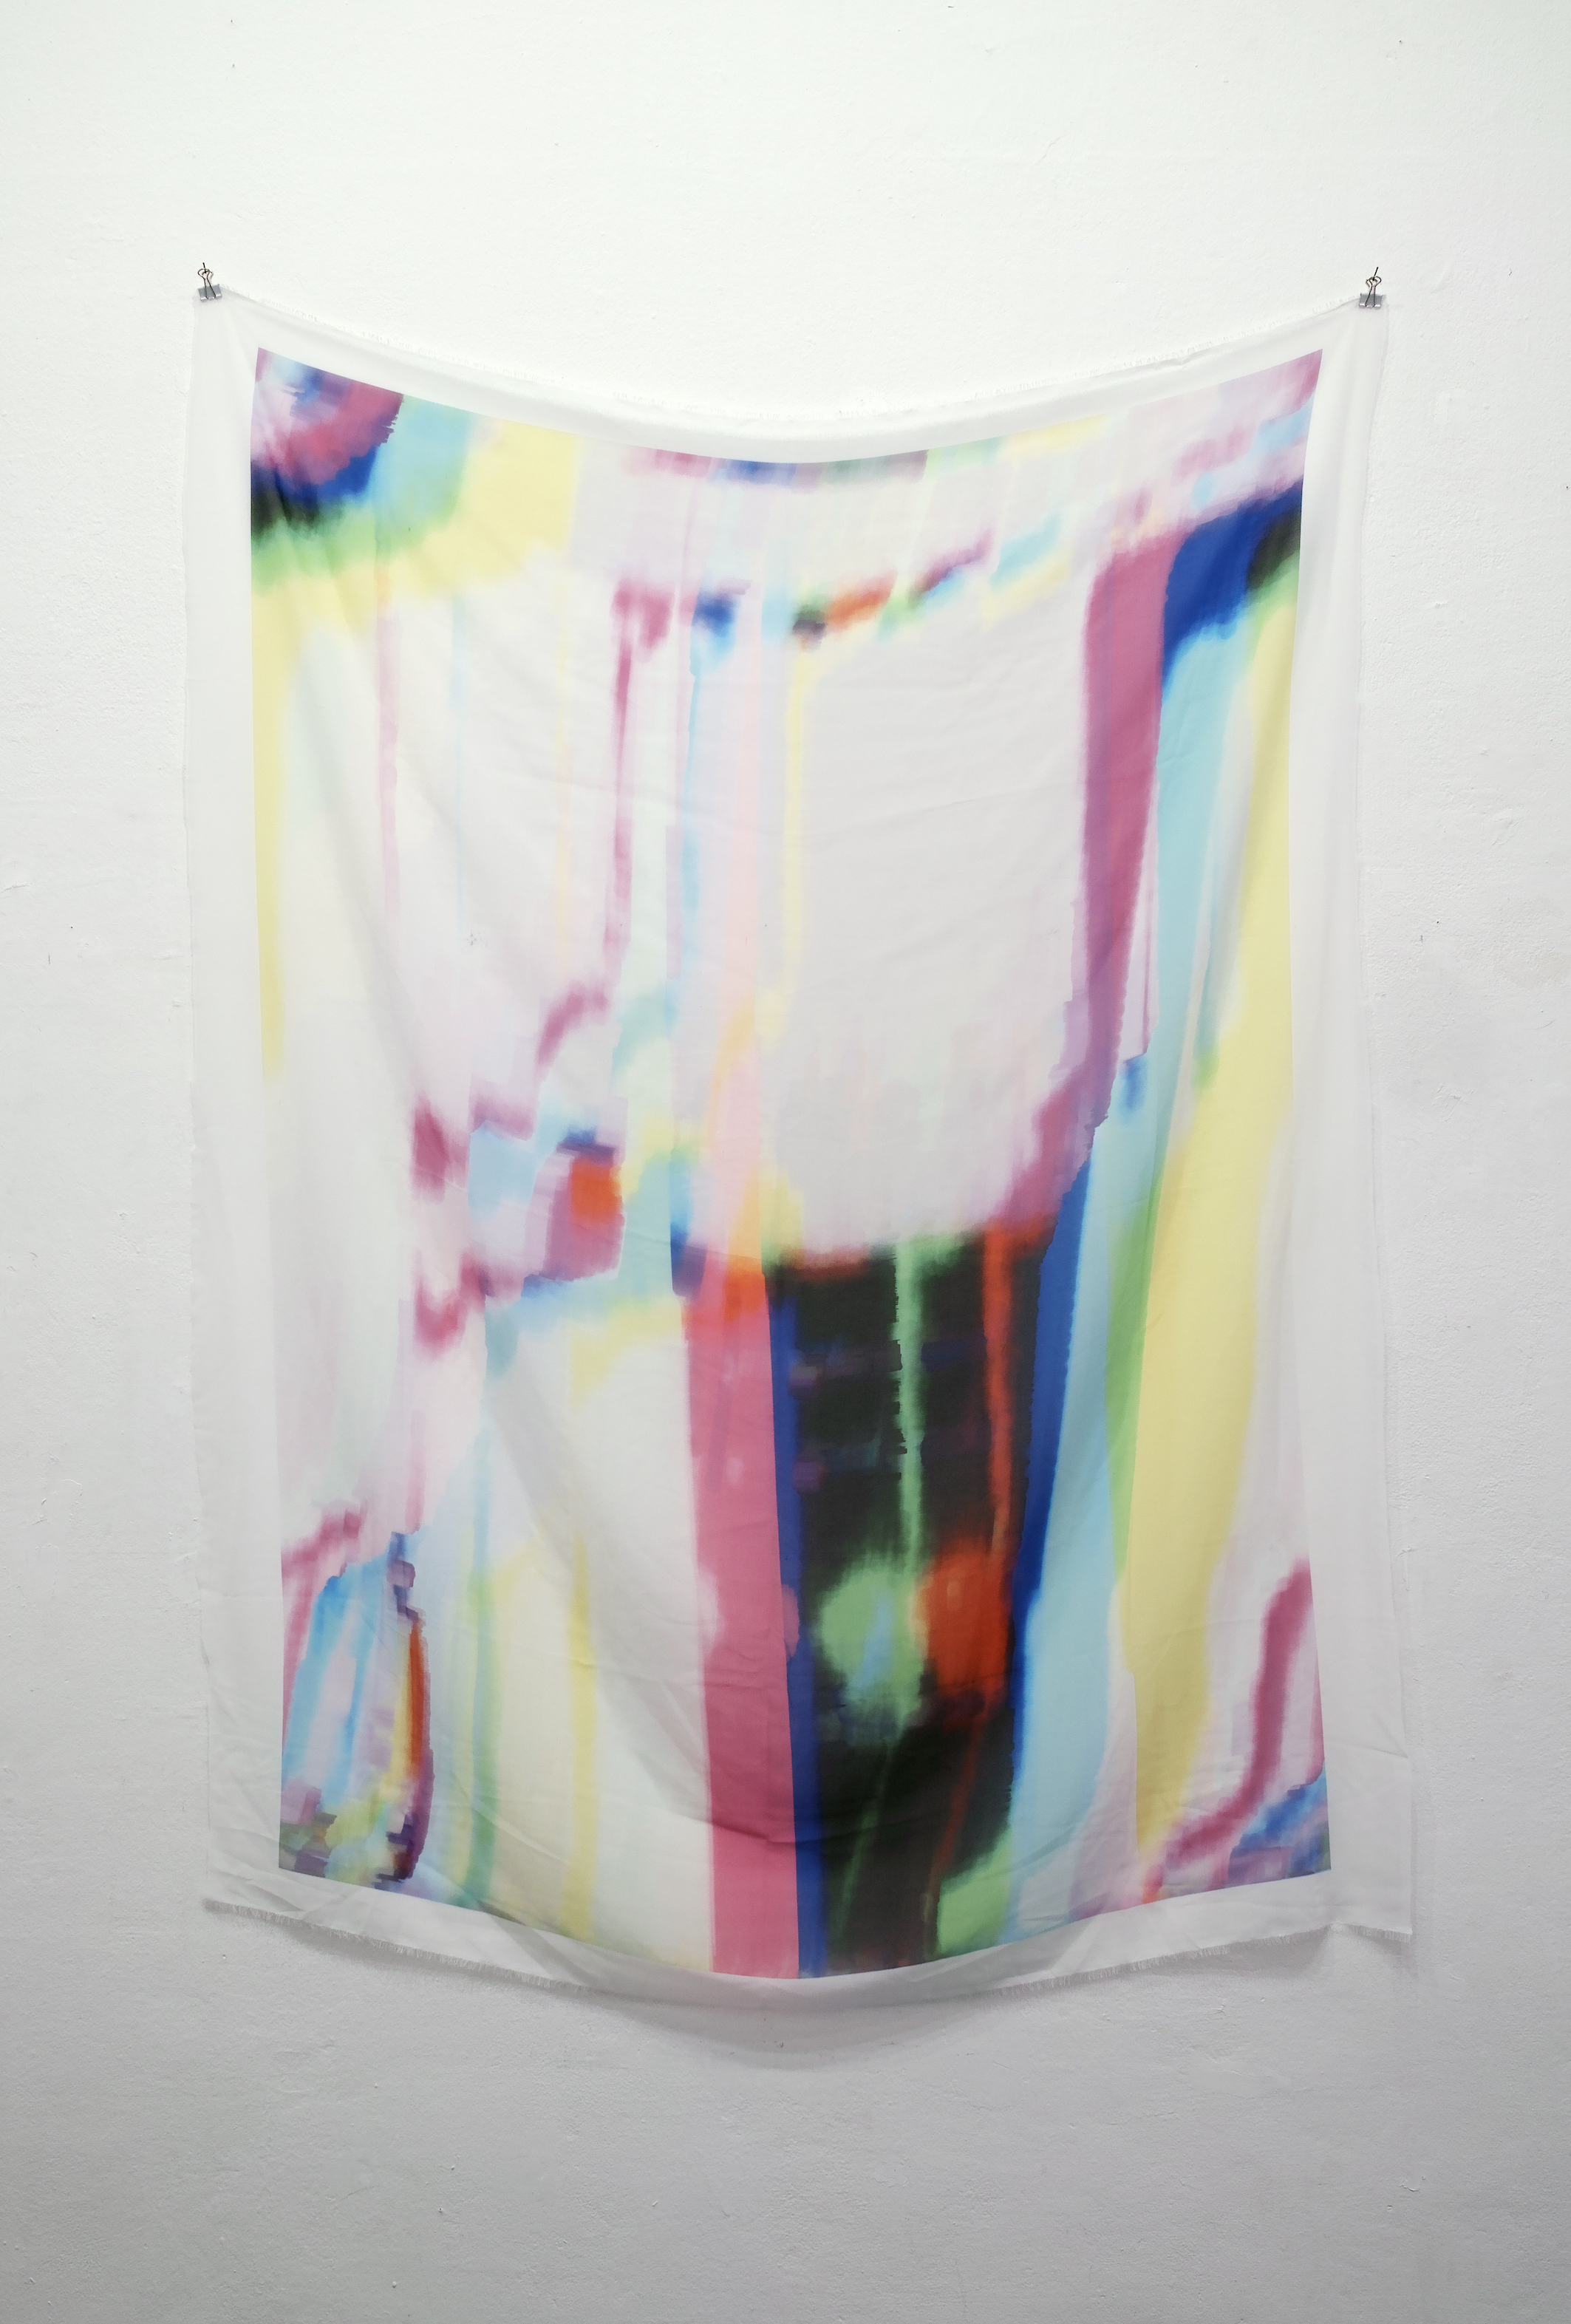 Ronny Faber Dahl, From dim to clear to curve, digitally generated image printed on polyester fabric 